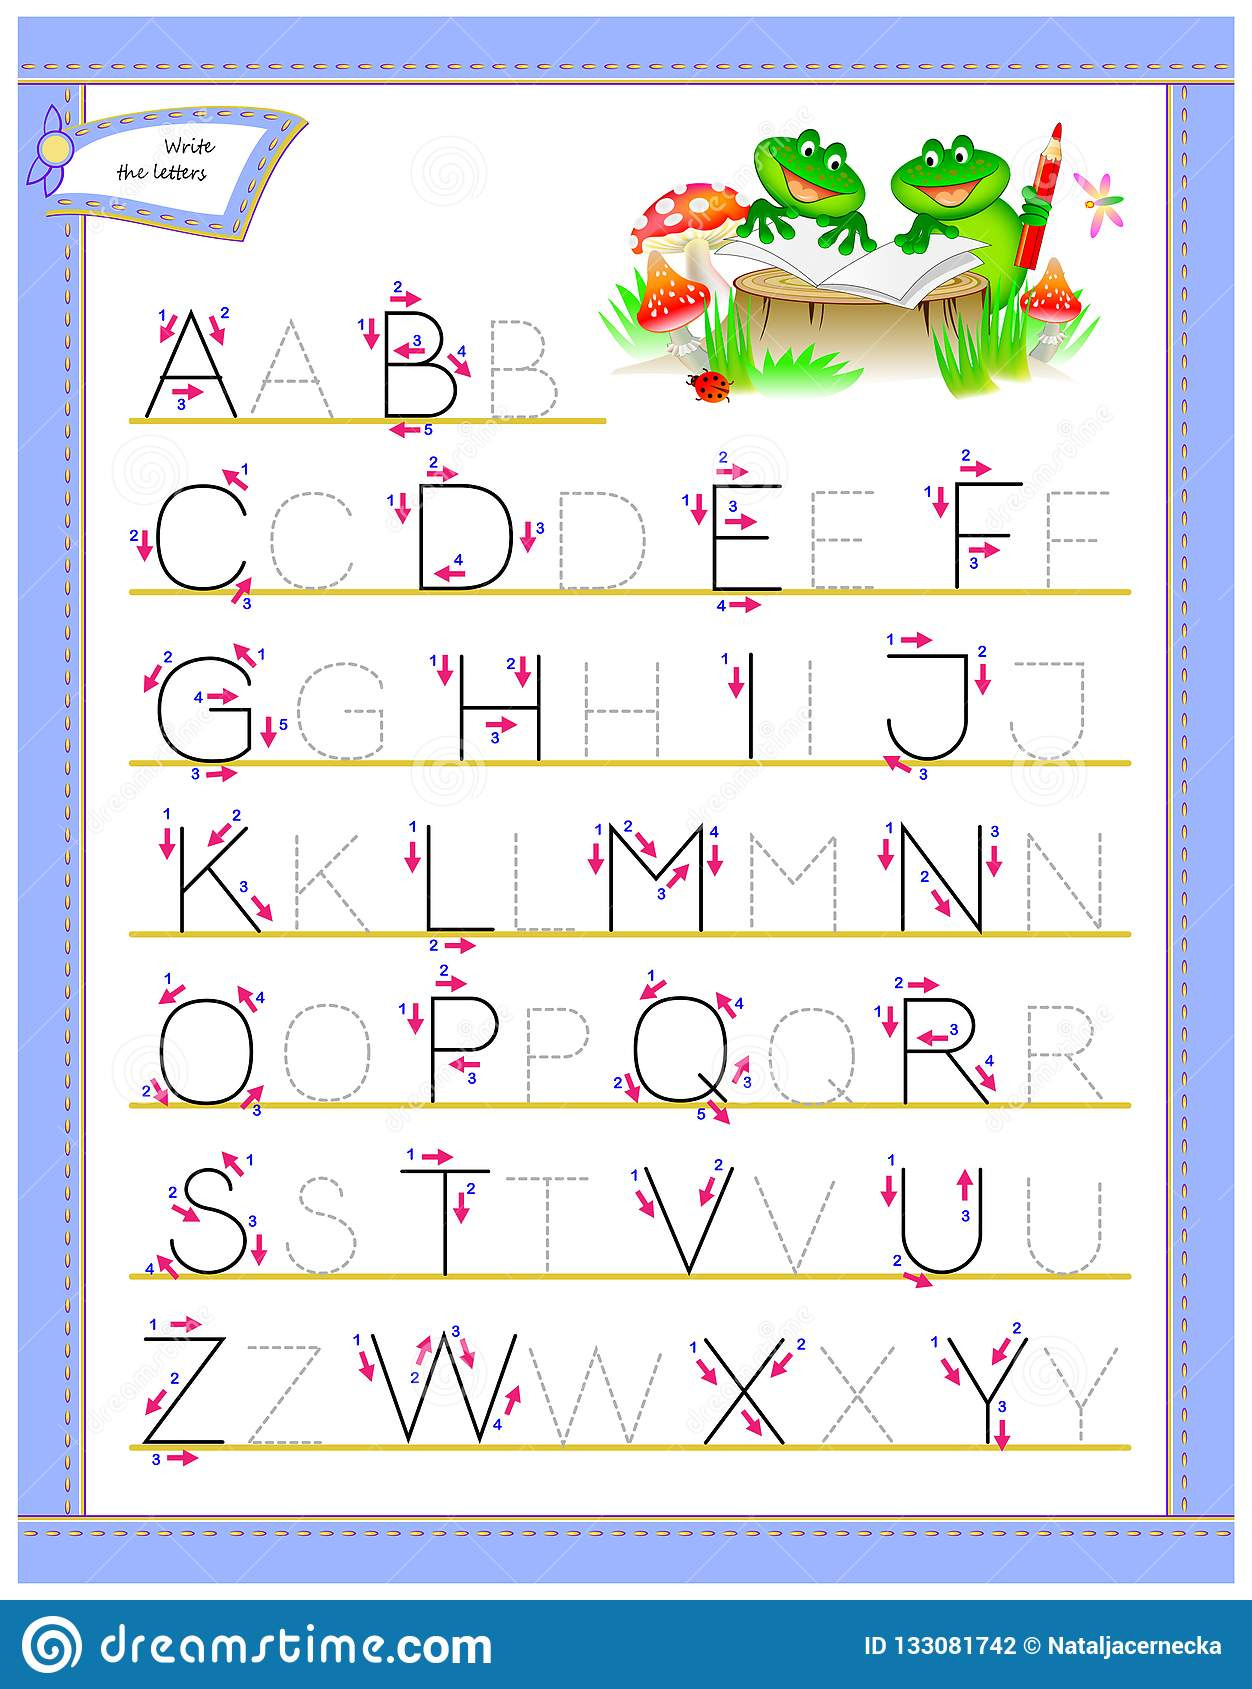 Tracing Abc Letters For Study English Alphabet. Worksheet intended for Alphabet Pattern Worksheets